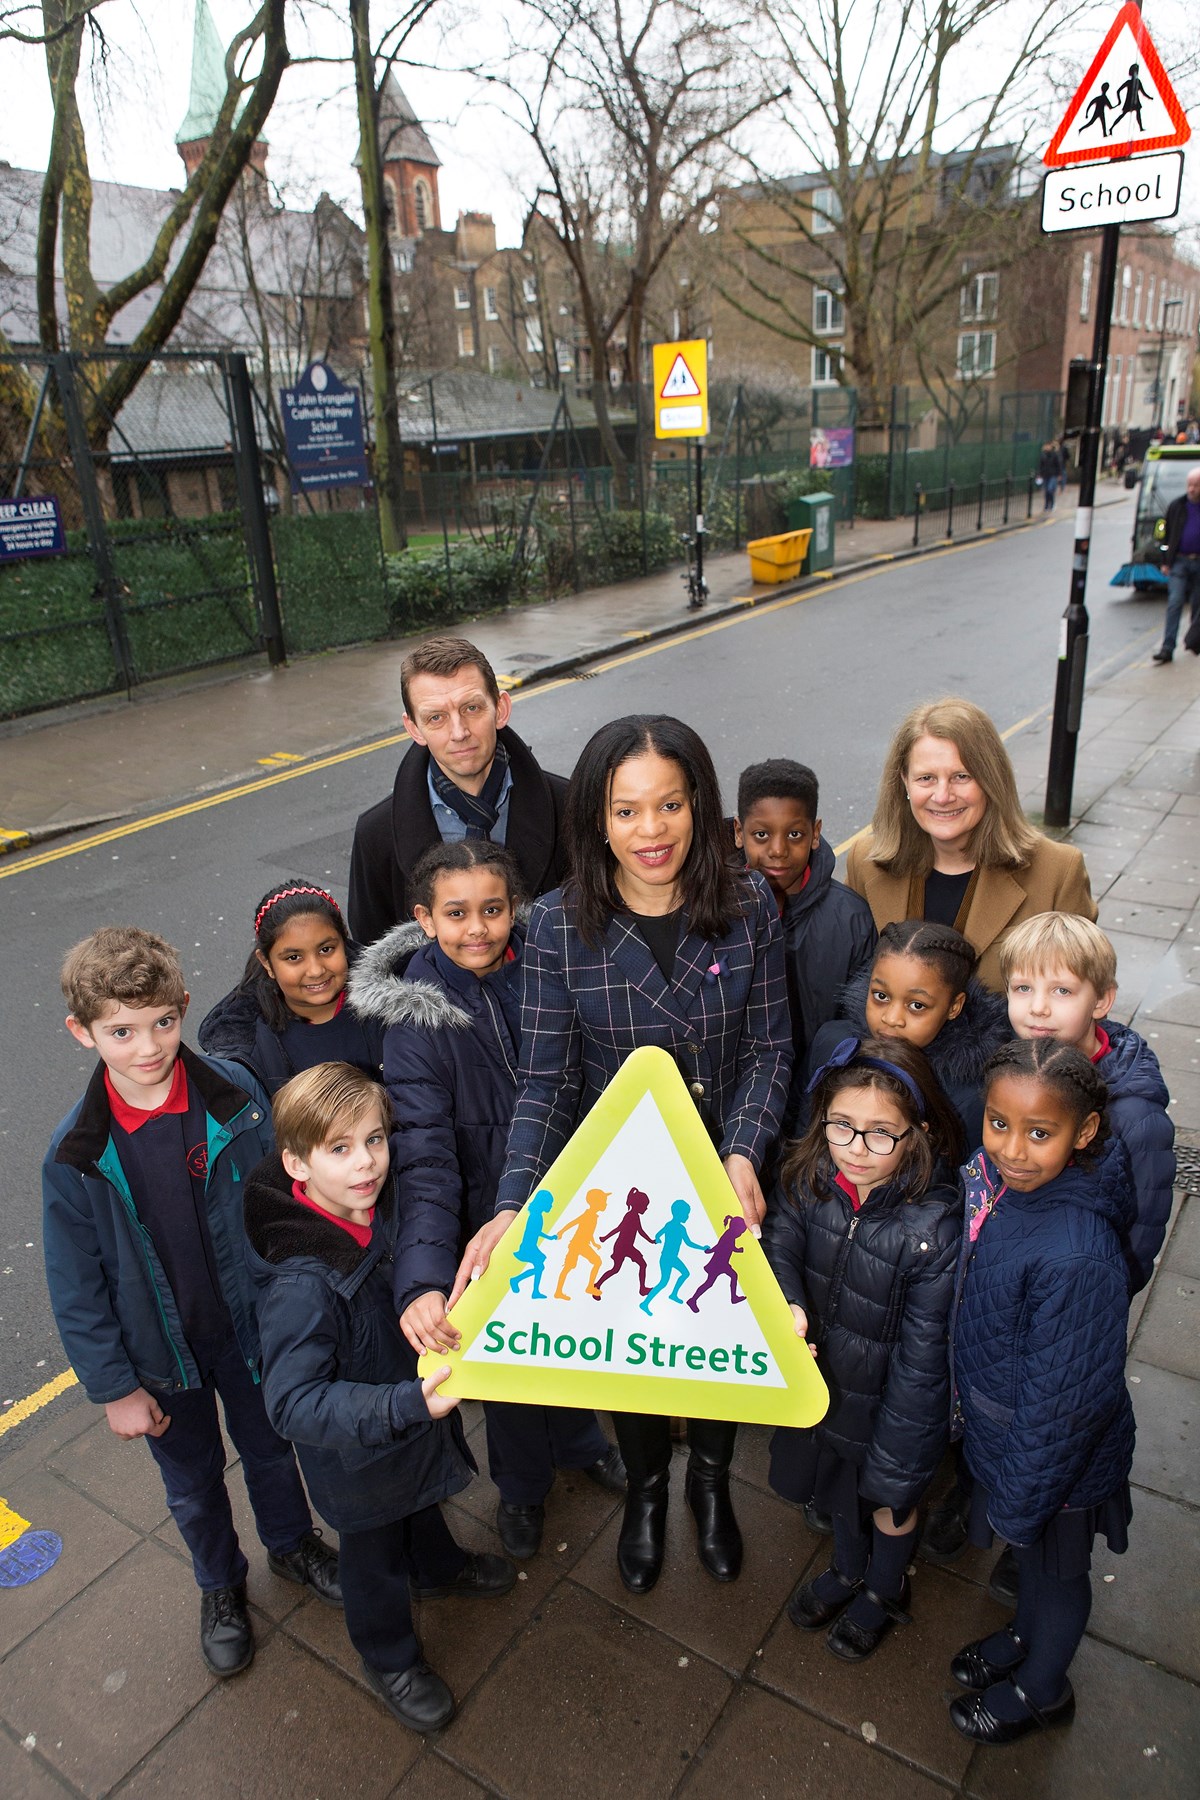 Pupils and staff at St John Evangelist Catholic Primary School, which has Islington's first School Street, with Cllr Claudia Webbe.  NB Picture was taken at start of consultation in March 2018